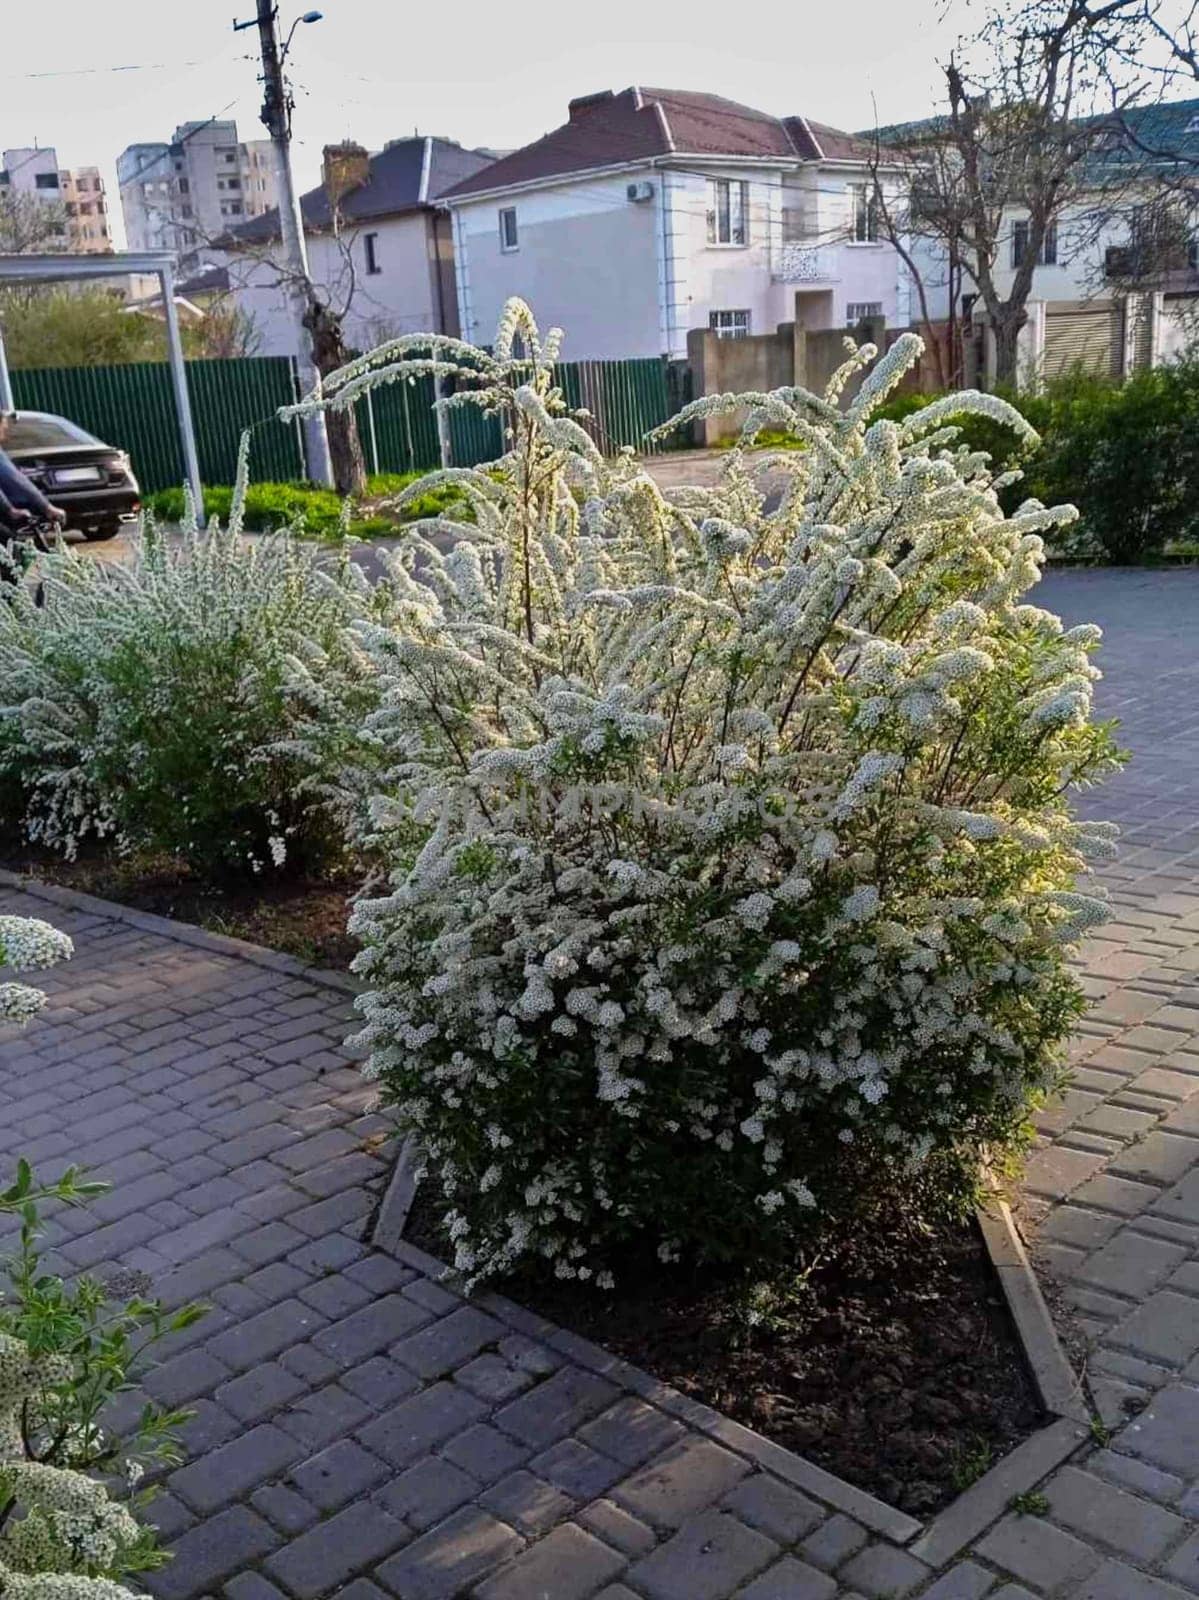 Along the street you can see cars, and bushes of deciduous shrubs "Spiraea nipponica" are planted.